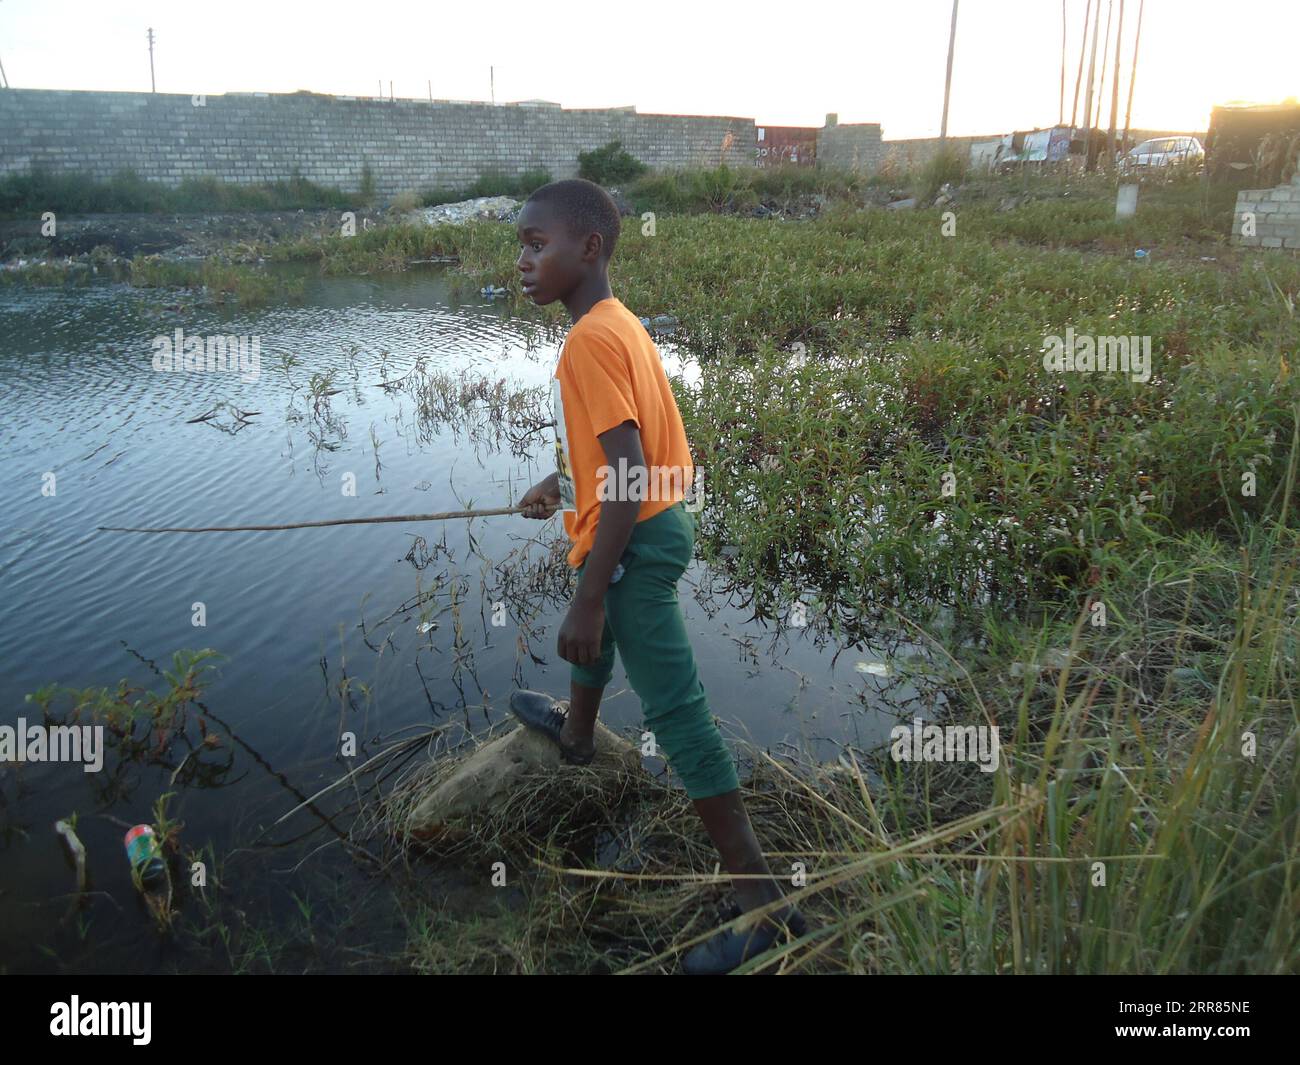 210419 -- LUSAKA, April 19, 2021 -- A boy fishes at a popular dam in Misisi compound, a slum in Zambia s capital Lusaka on April 12, 2021. Photo by /Xinhua TO GO WITH Feature: Slum children in Zambia help supplement household food supplies ZAMBIA-LUSAKA-SLUM CHILDREN-FISHING LillianxBanda PUBLICATIONxNOTxINxCHN Stock Photo